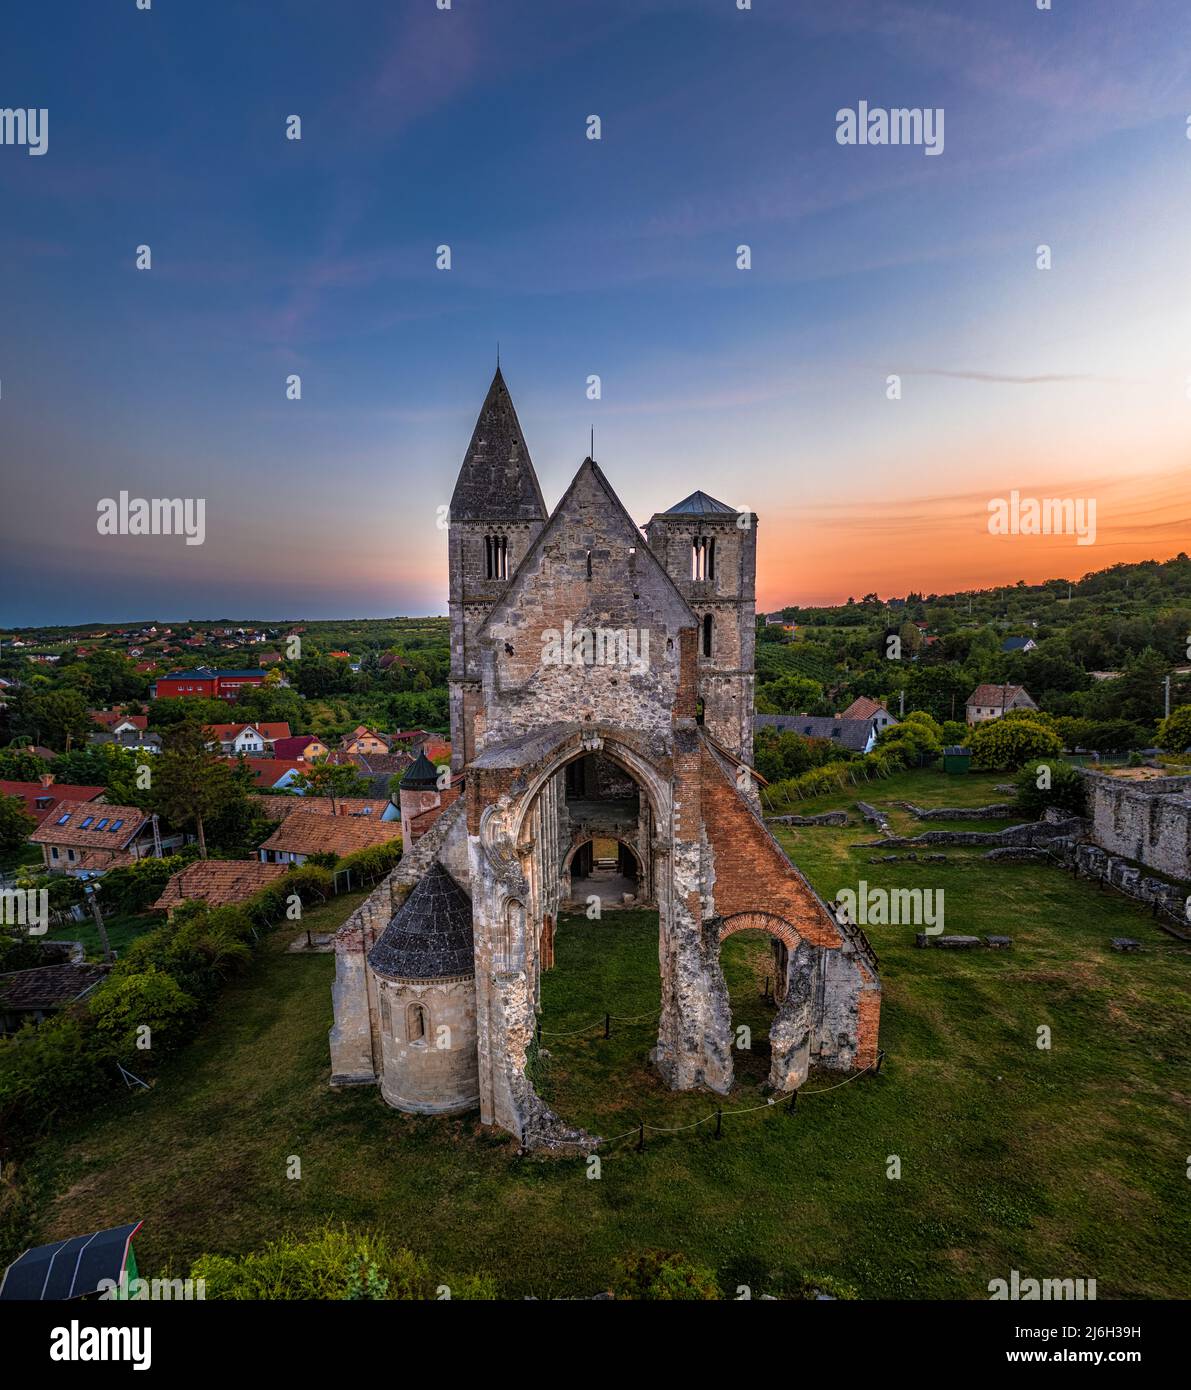 Zsambek, Hungary - Aerial view of the beautiful Premontre Monastery ruin church of Zsambek (Schambeck) with cemetery and colorful dramatic sunset at b Stock Photo